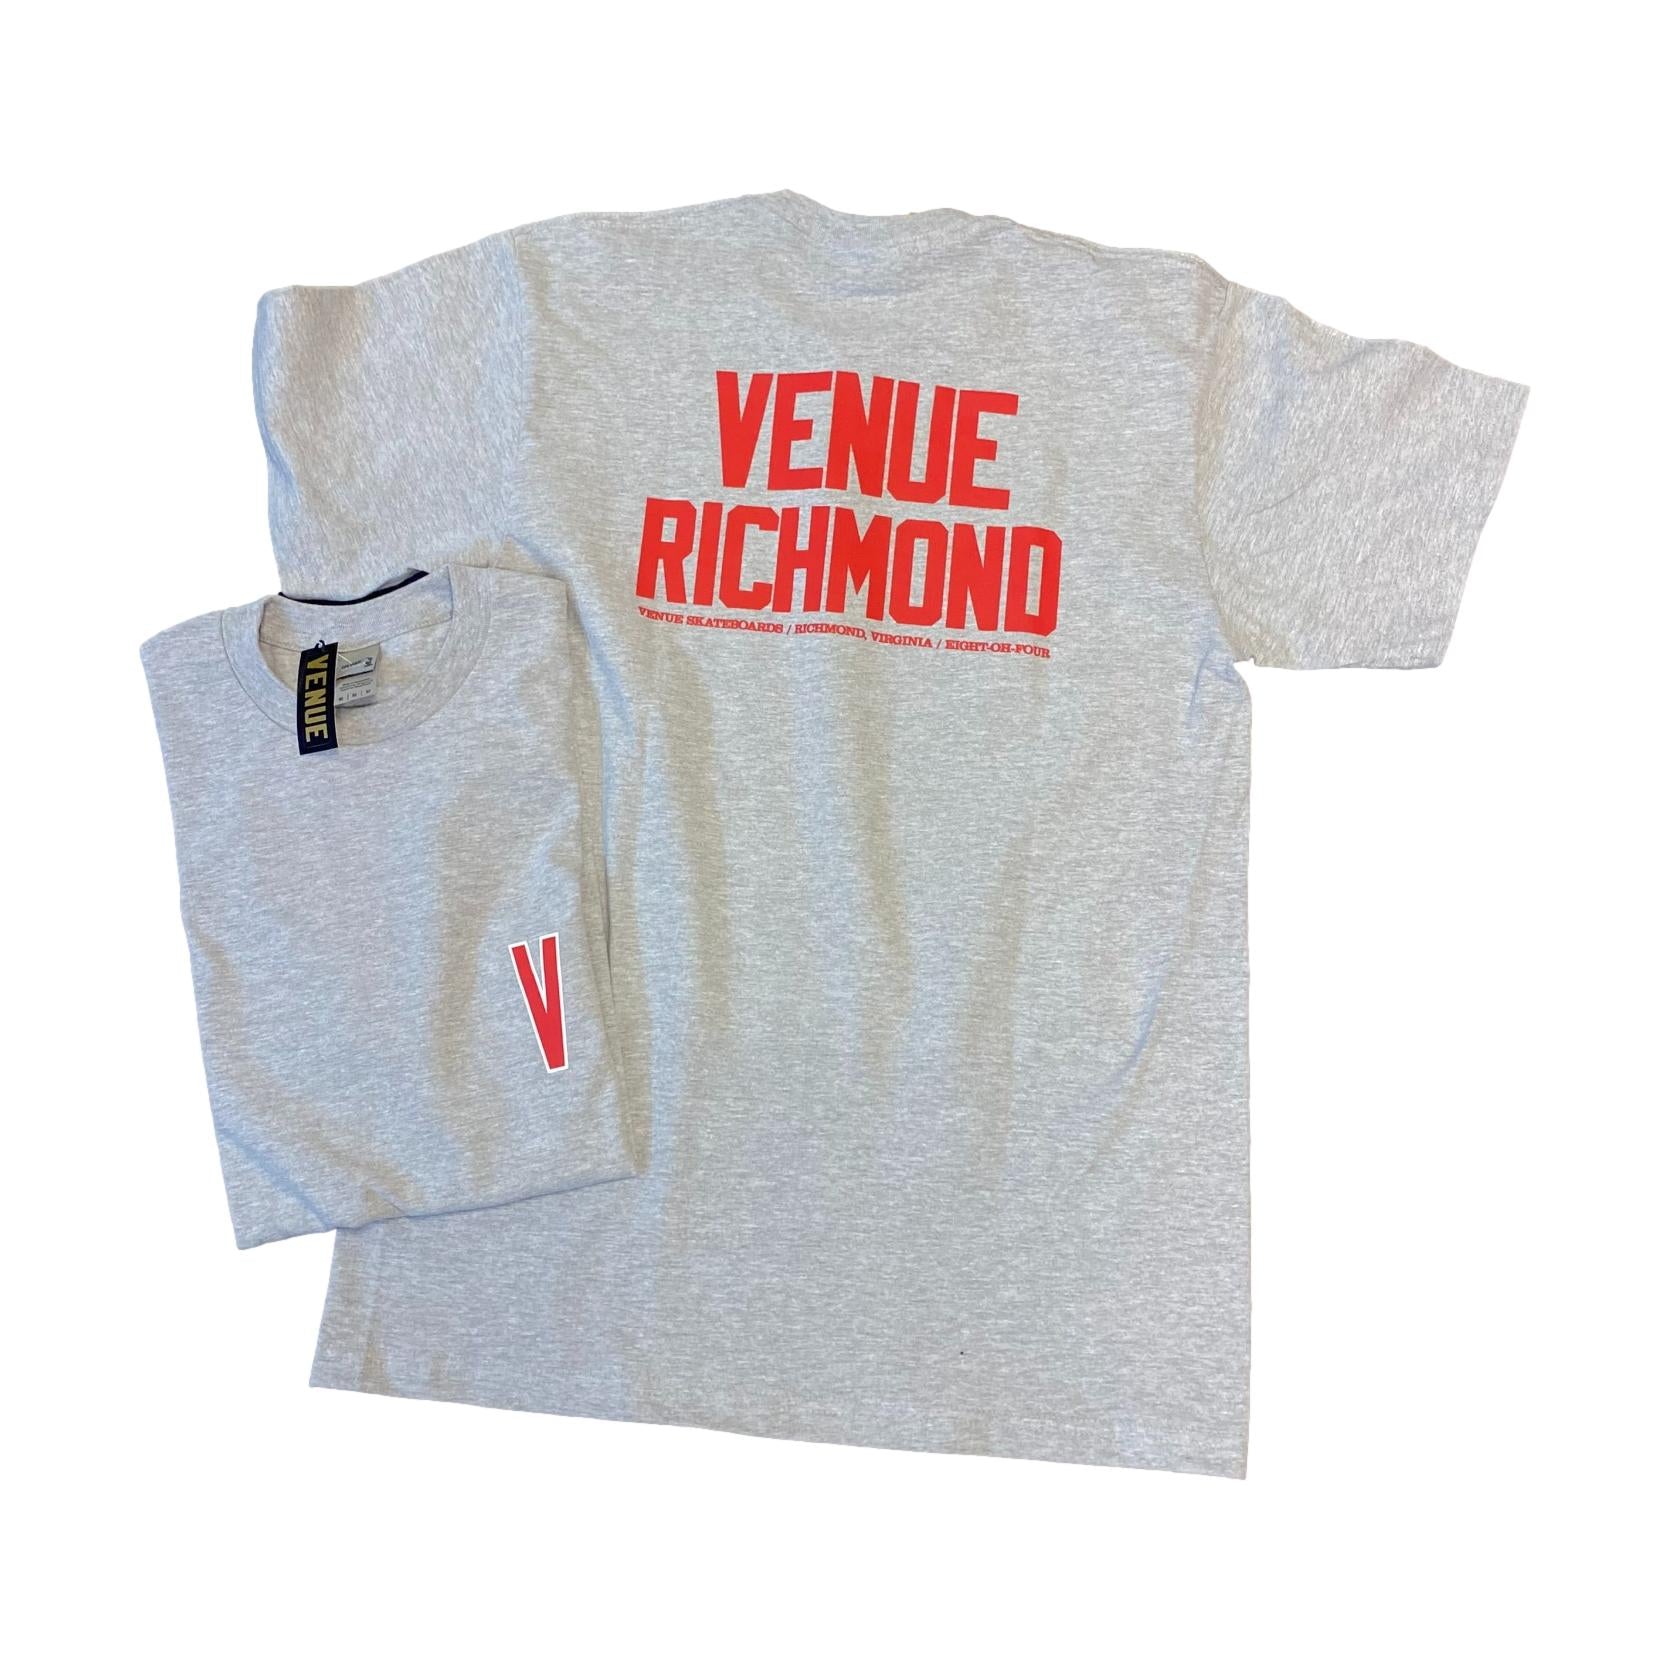 Venue Richmond T - Grey with Red Ink - Venue Skateboards